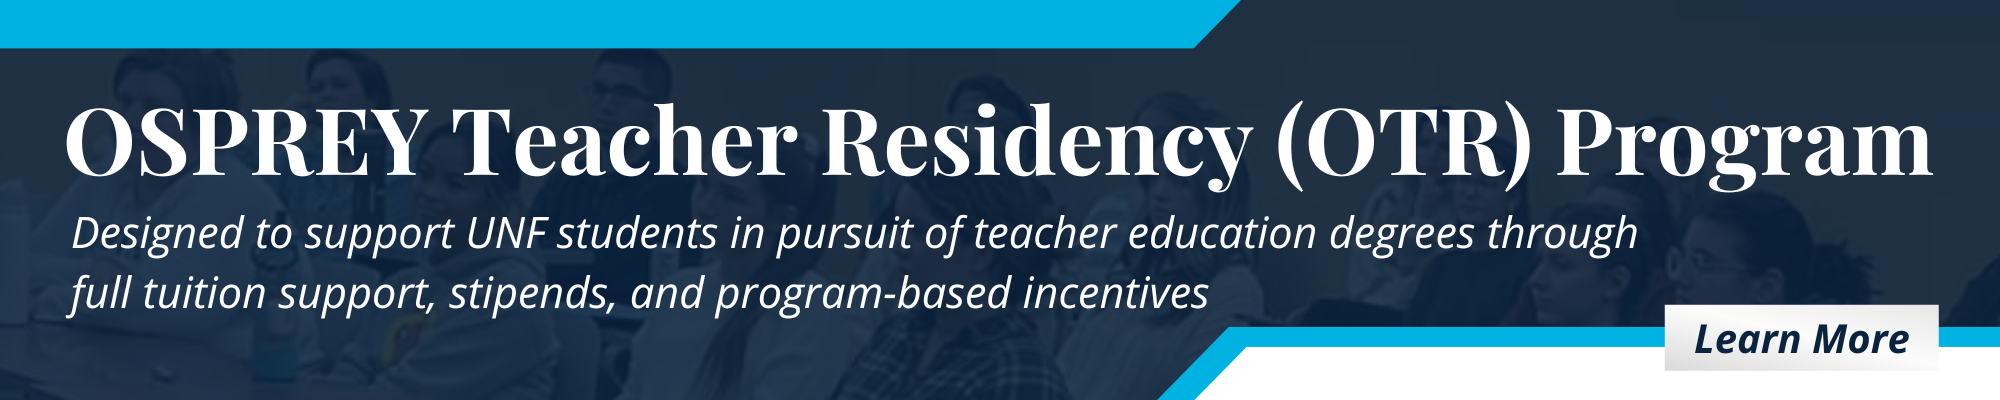 osprey teacher residency program designed to support UNF students pursuing teacher education degrees with full tuition support and incentives